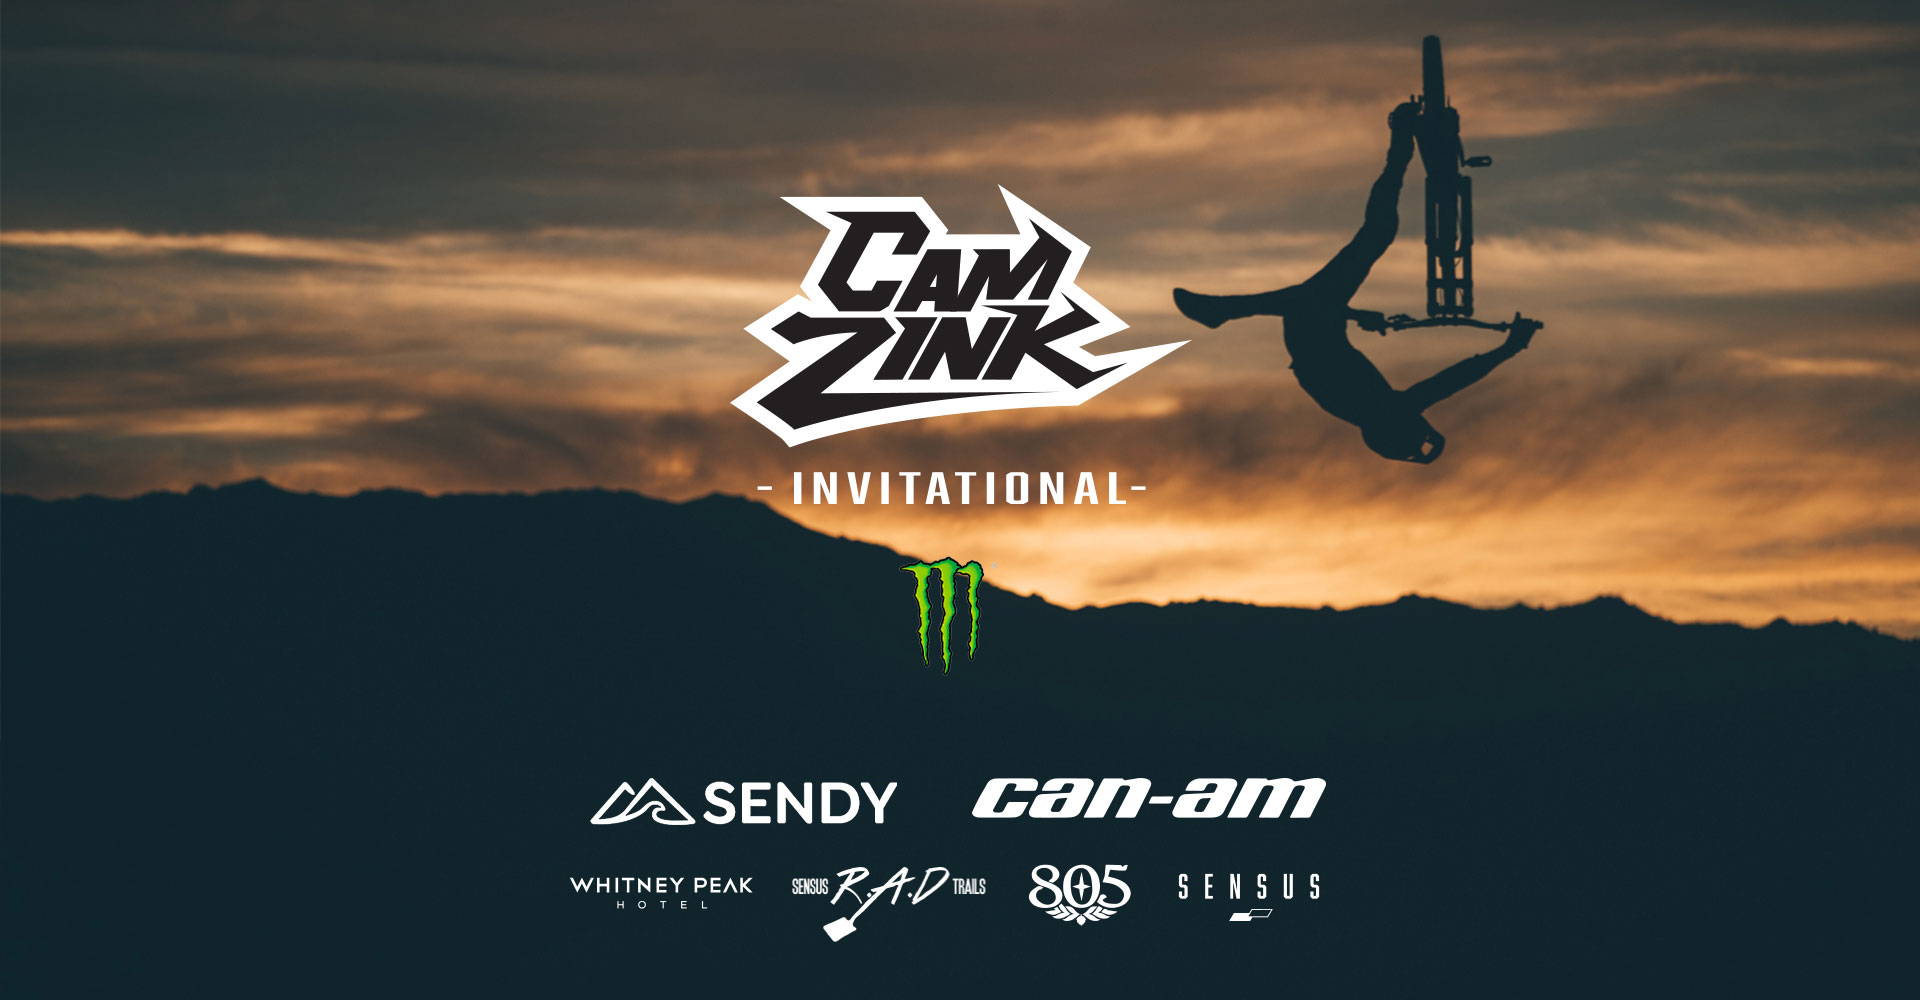 Promotional graphic for the Cam Zink Invitational